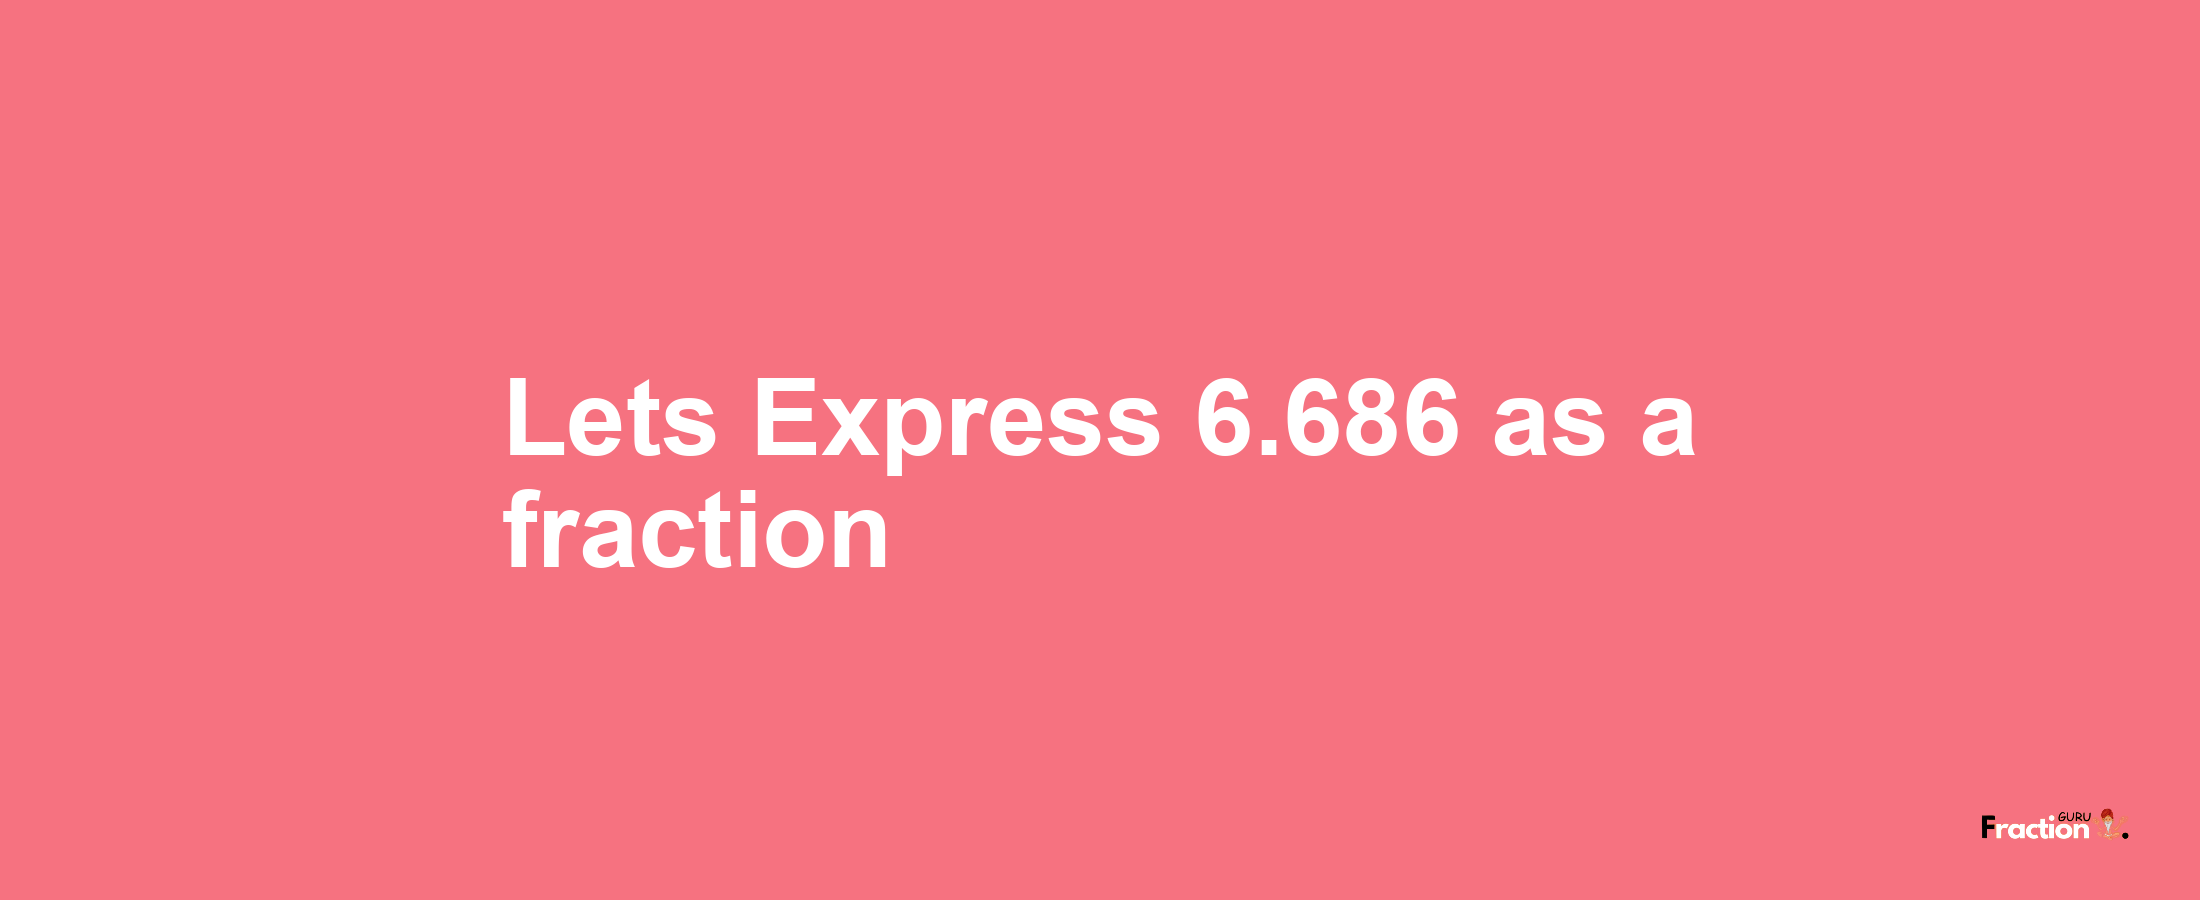 Lets Express 6.686 as afraction